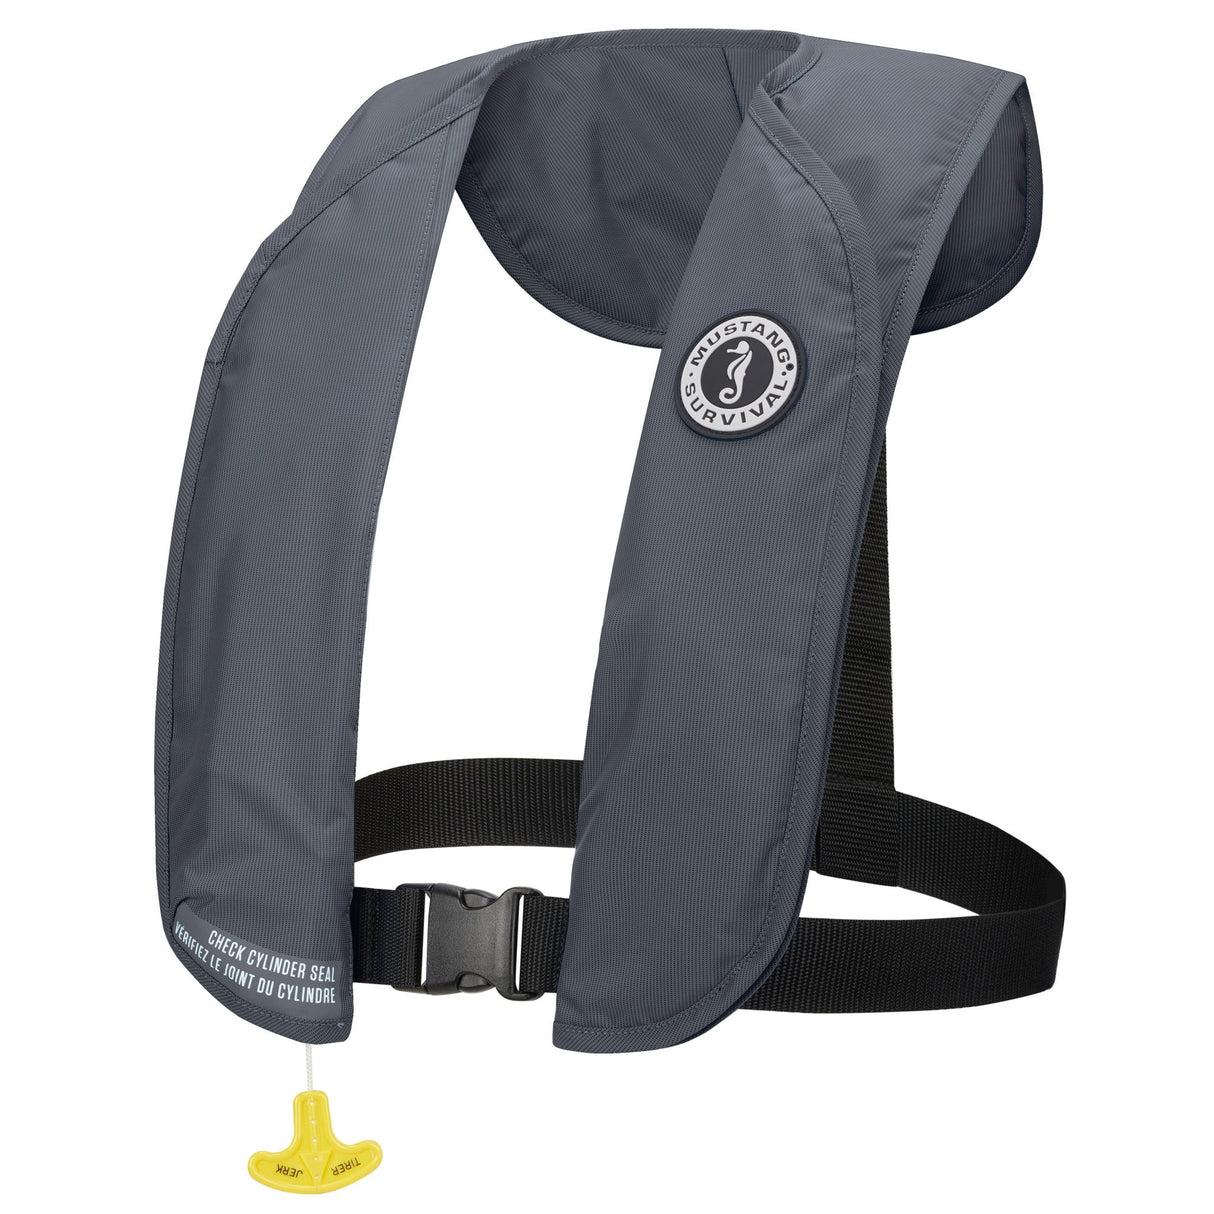 MUSTANG SURVIVAL MIT 70 AUTOMATIC INFLATABLE PFD ADMIRAL GRAY